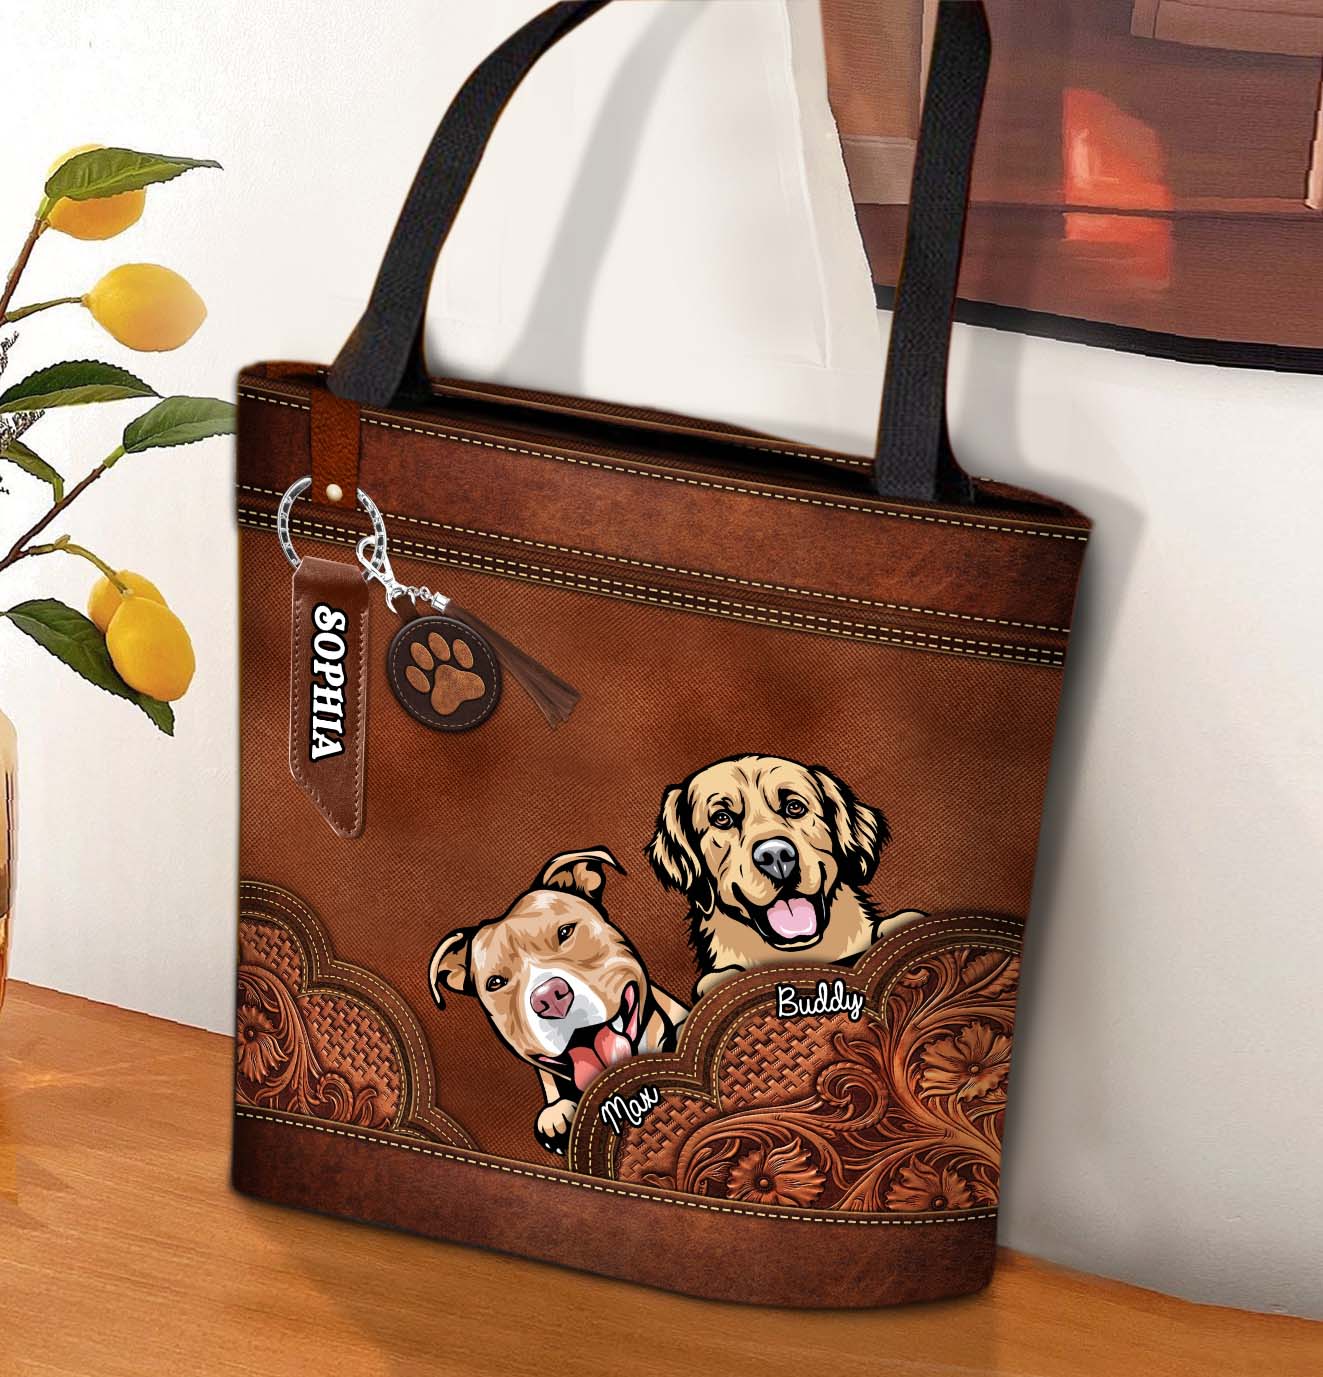 Buddy Personalized Dog Tote Bag